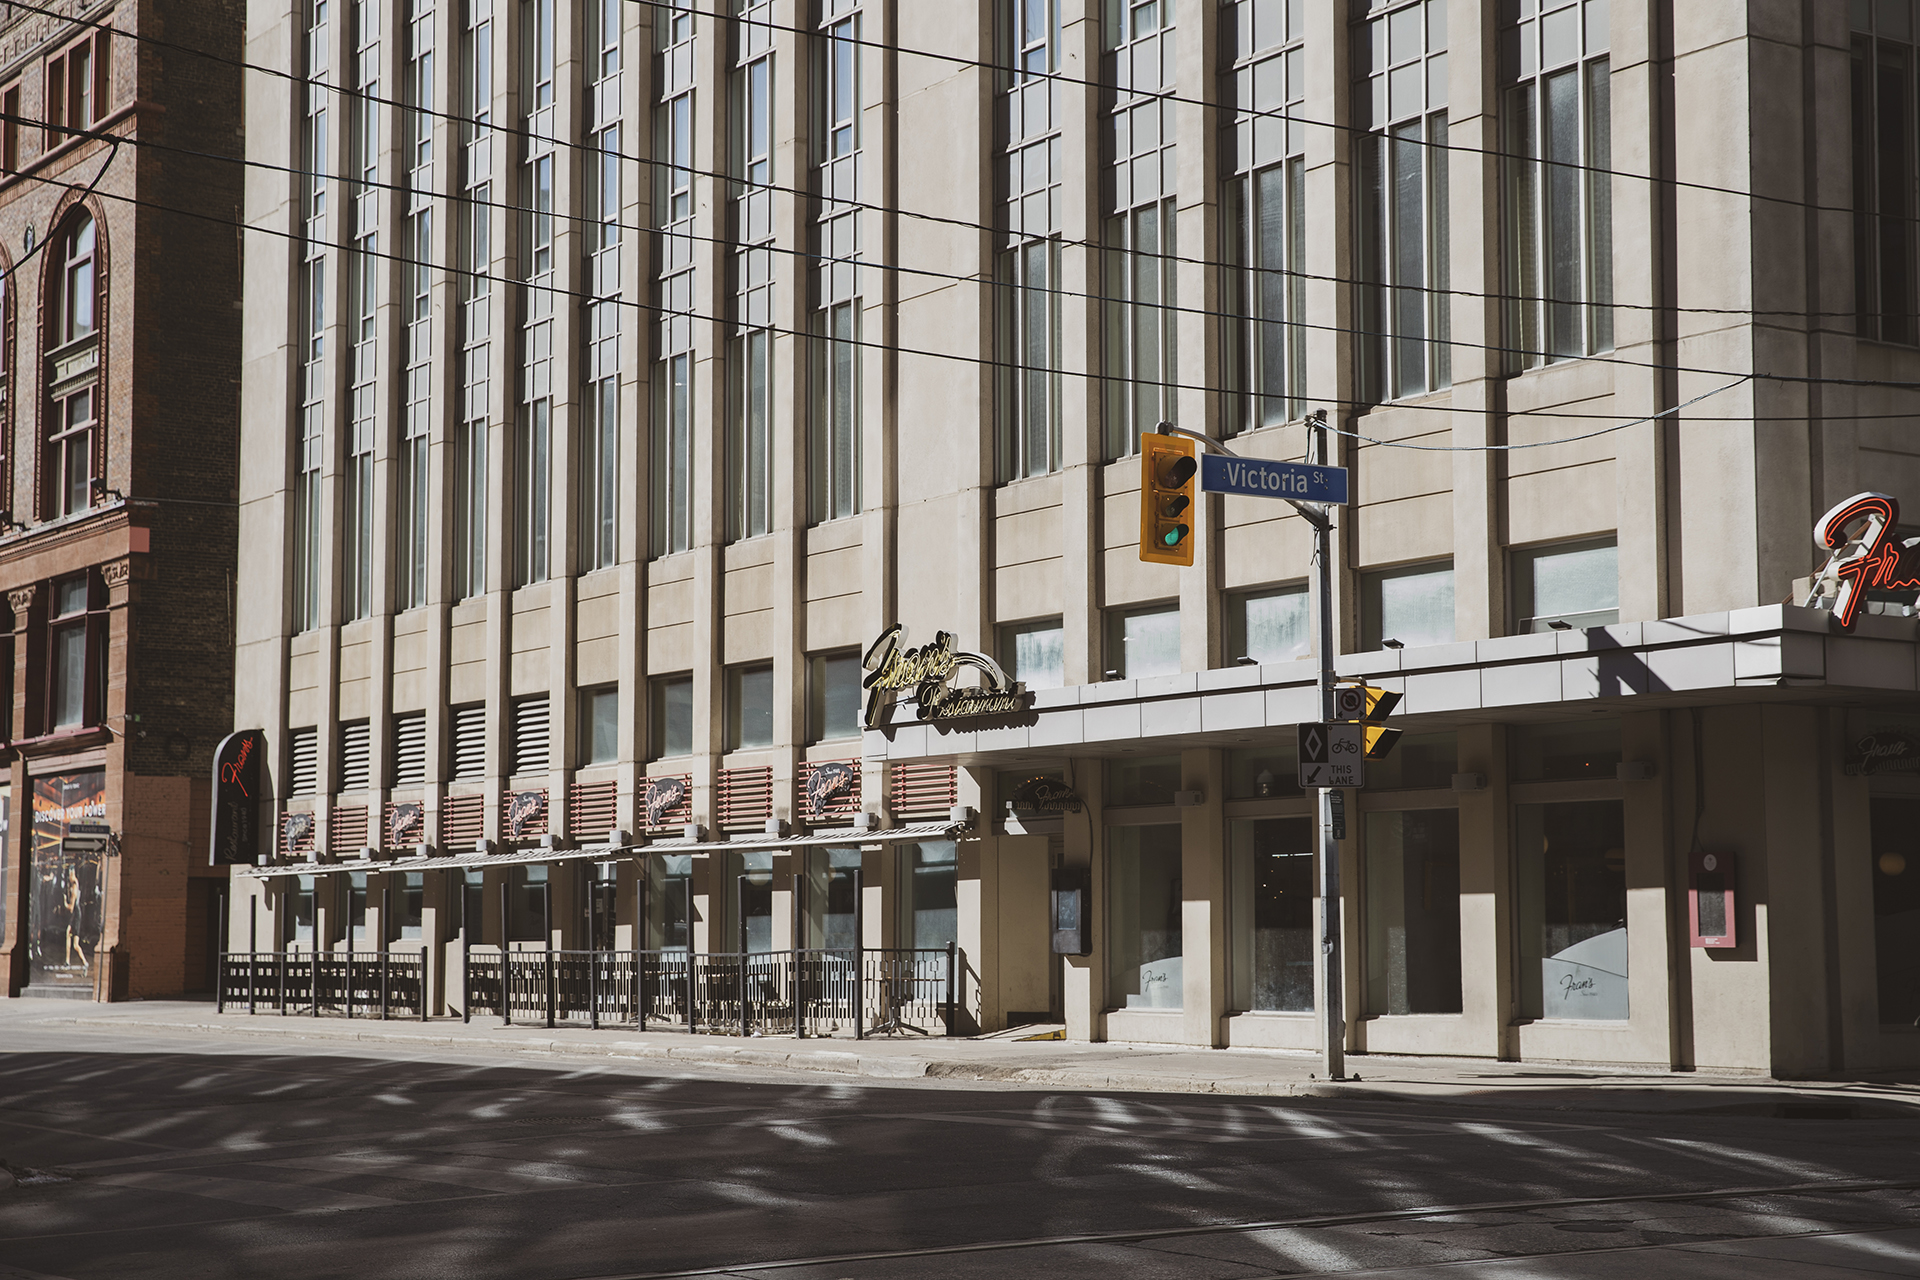 A tan-coloured building being bathed in sunlight. The building has many columns of tall windows and a golden sign that says "Fran's" on the side. There is a street sign and a stoplight, but there are no cars on the road. There is light from the building reflecting onto the pavement.